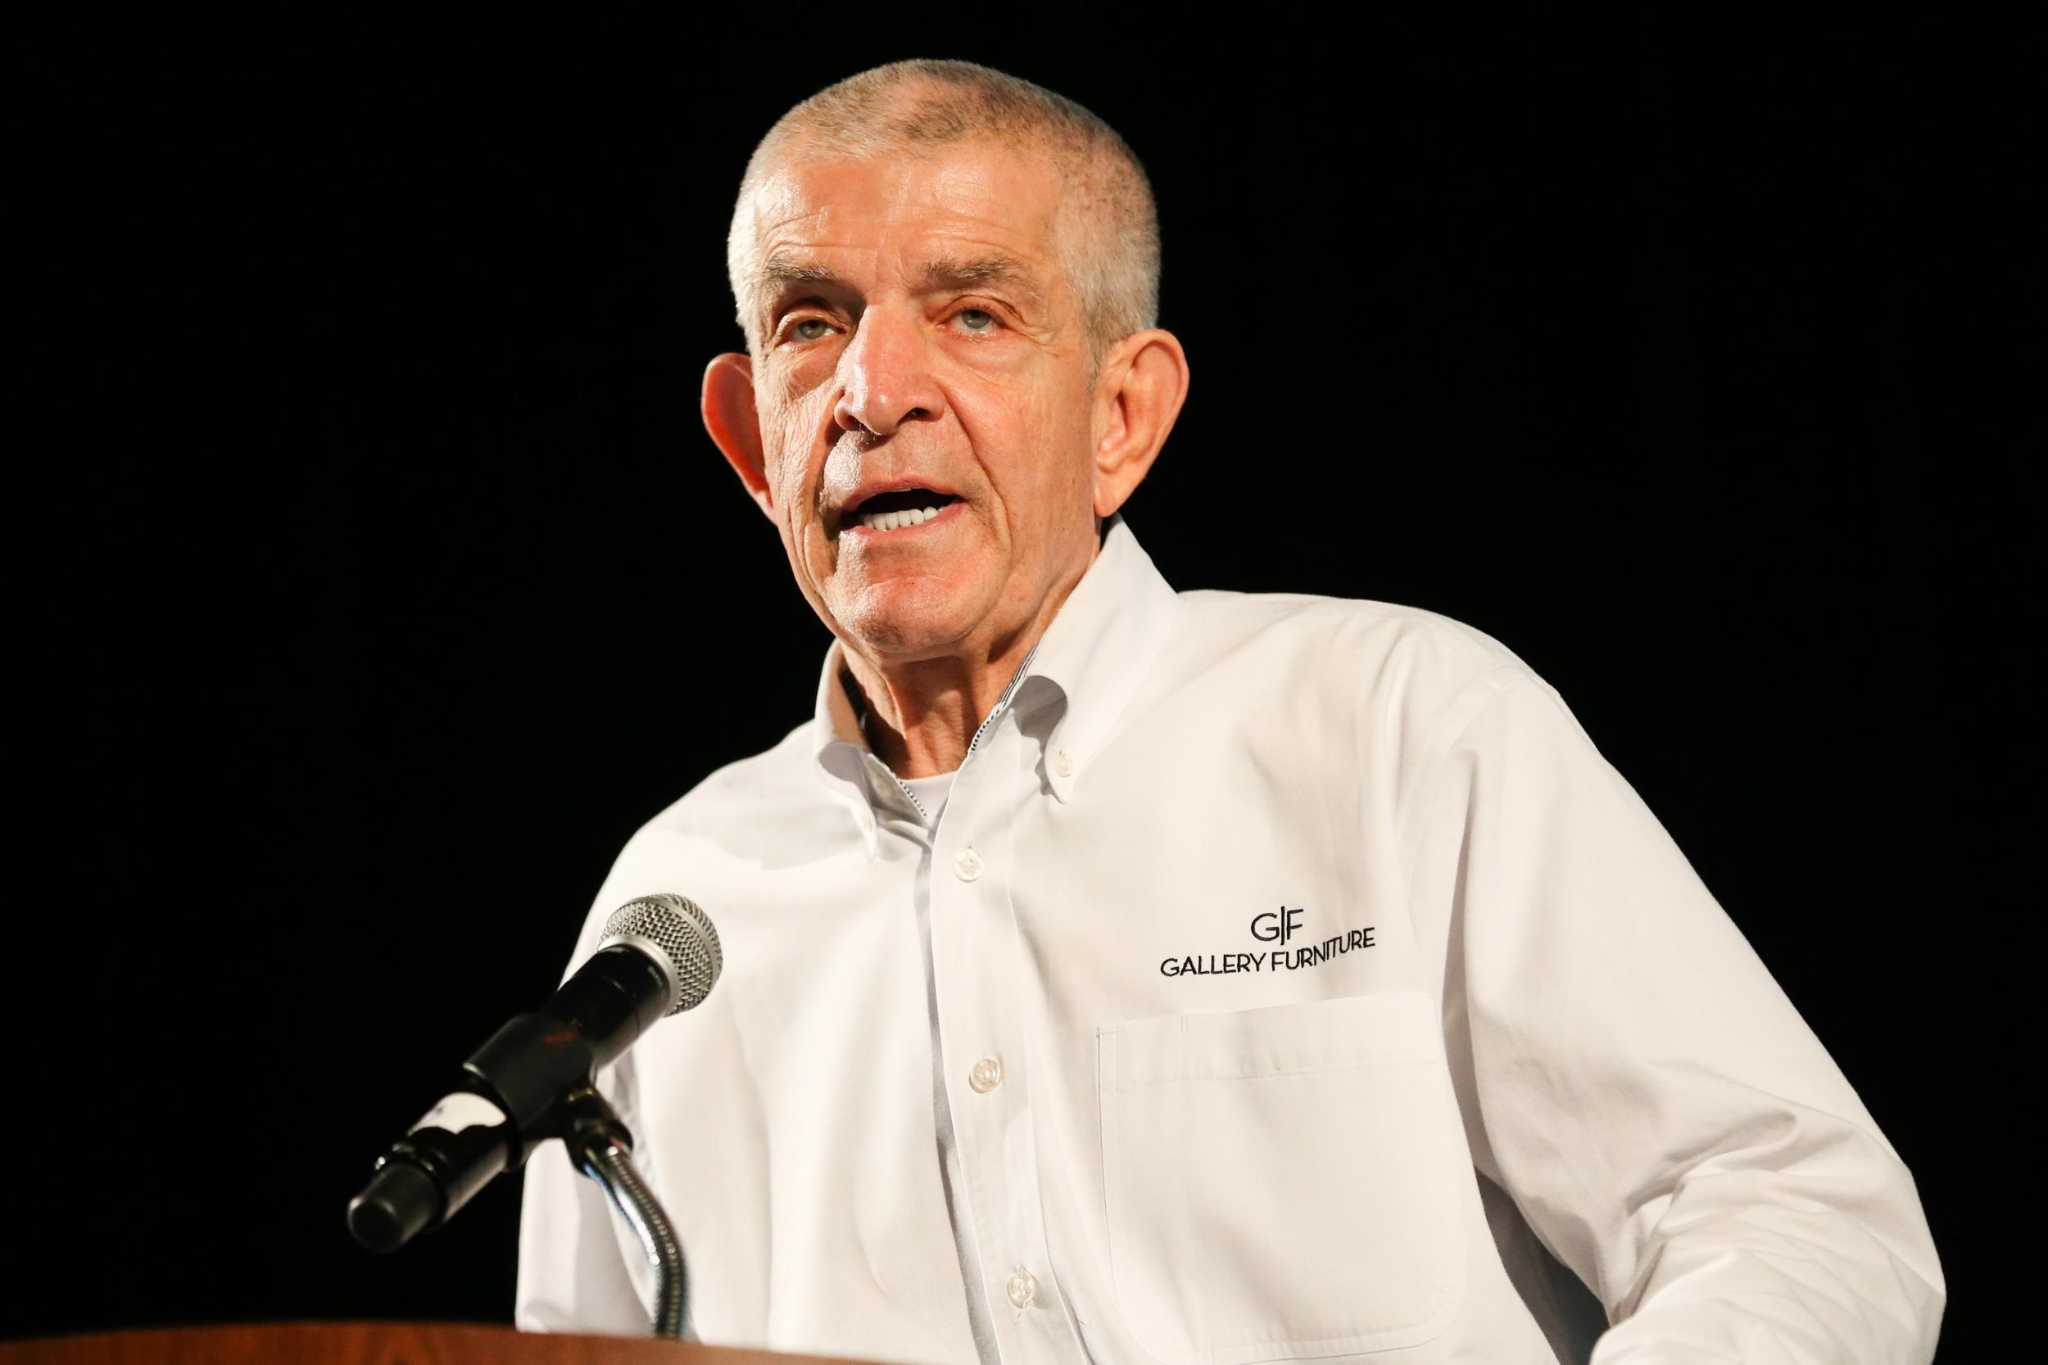 Mattress Mack announces plan to open schools, daycare on Houston’s north side - Houston Chronicle